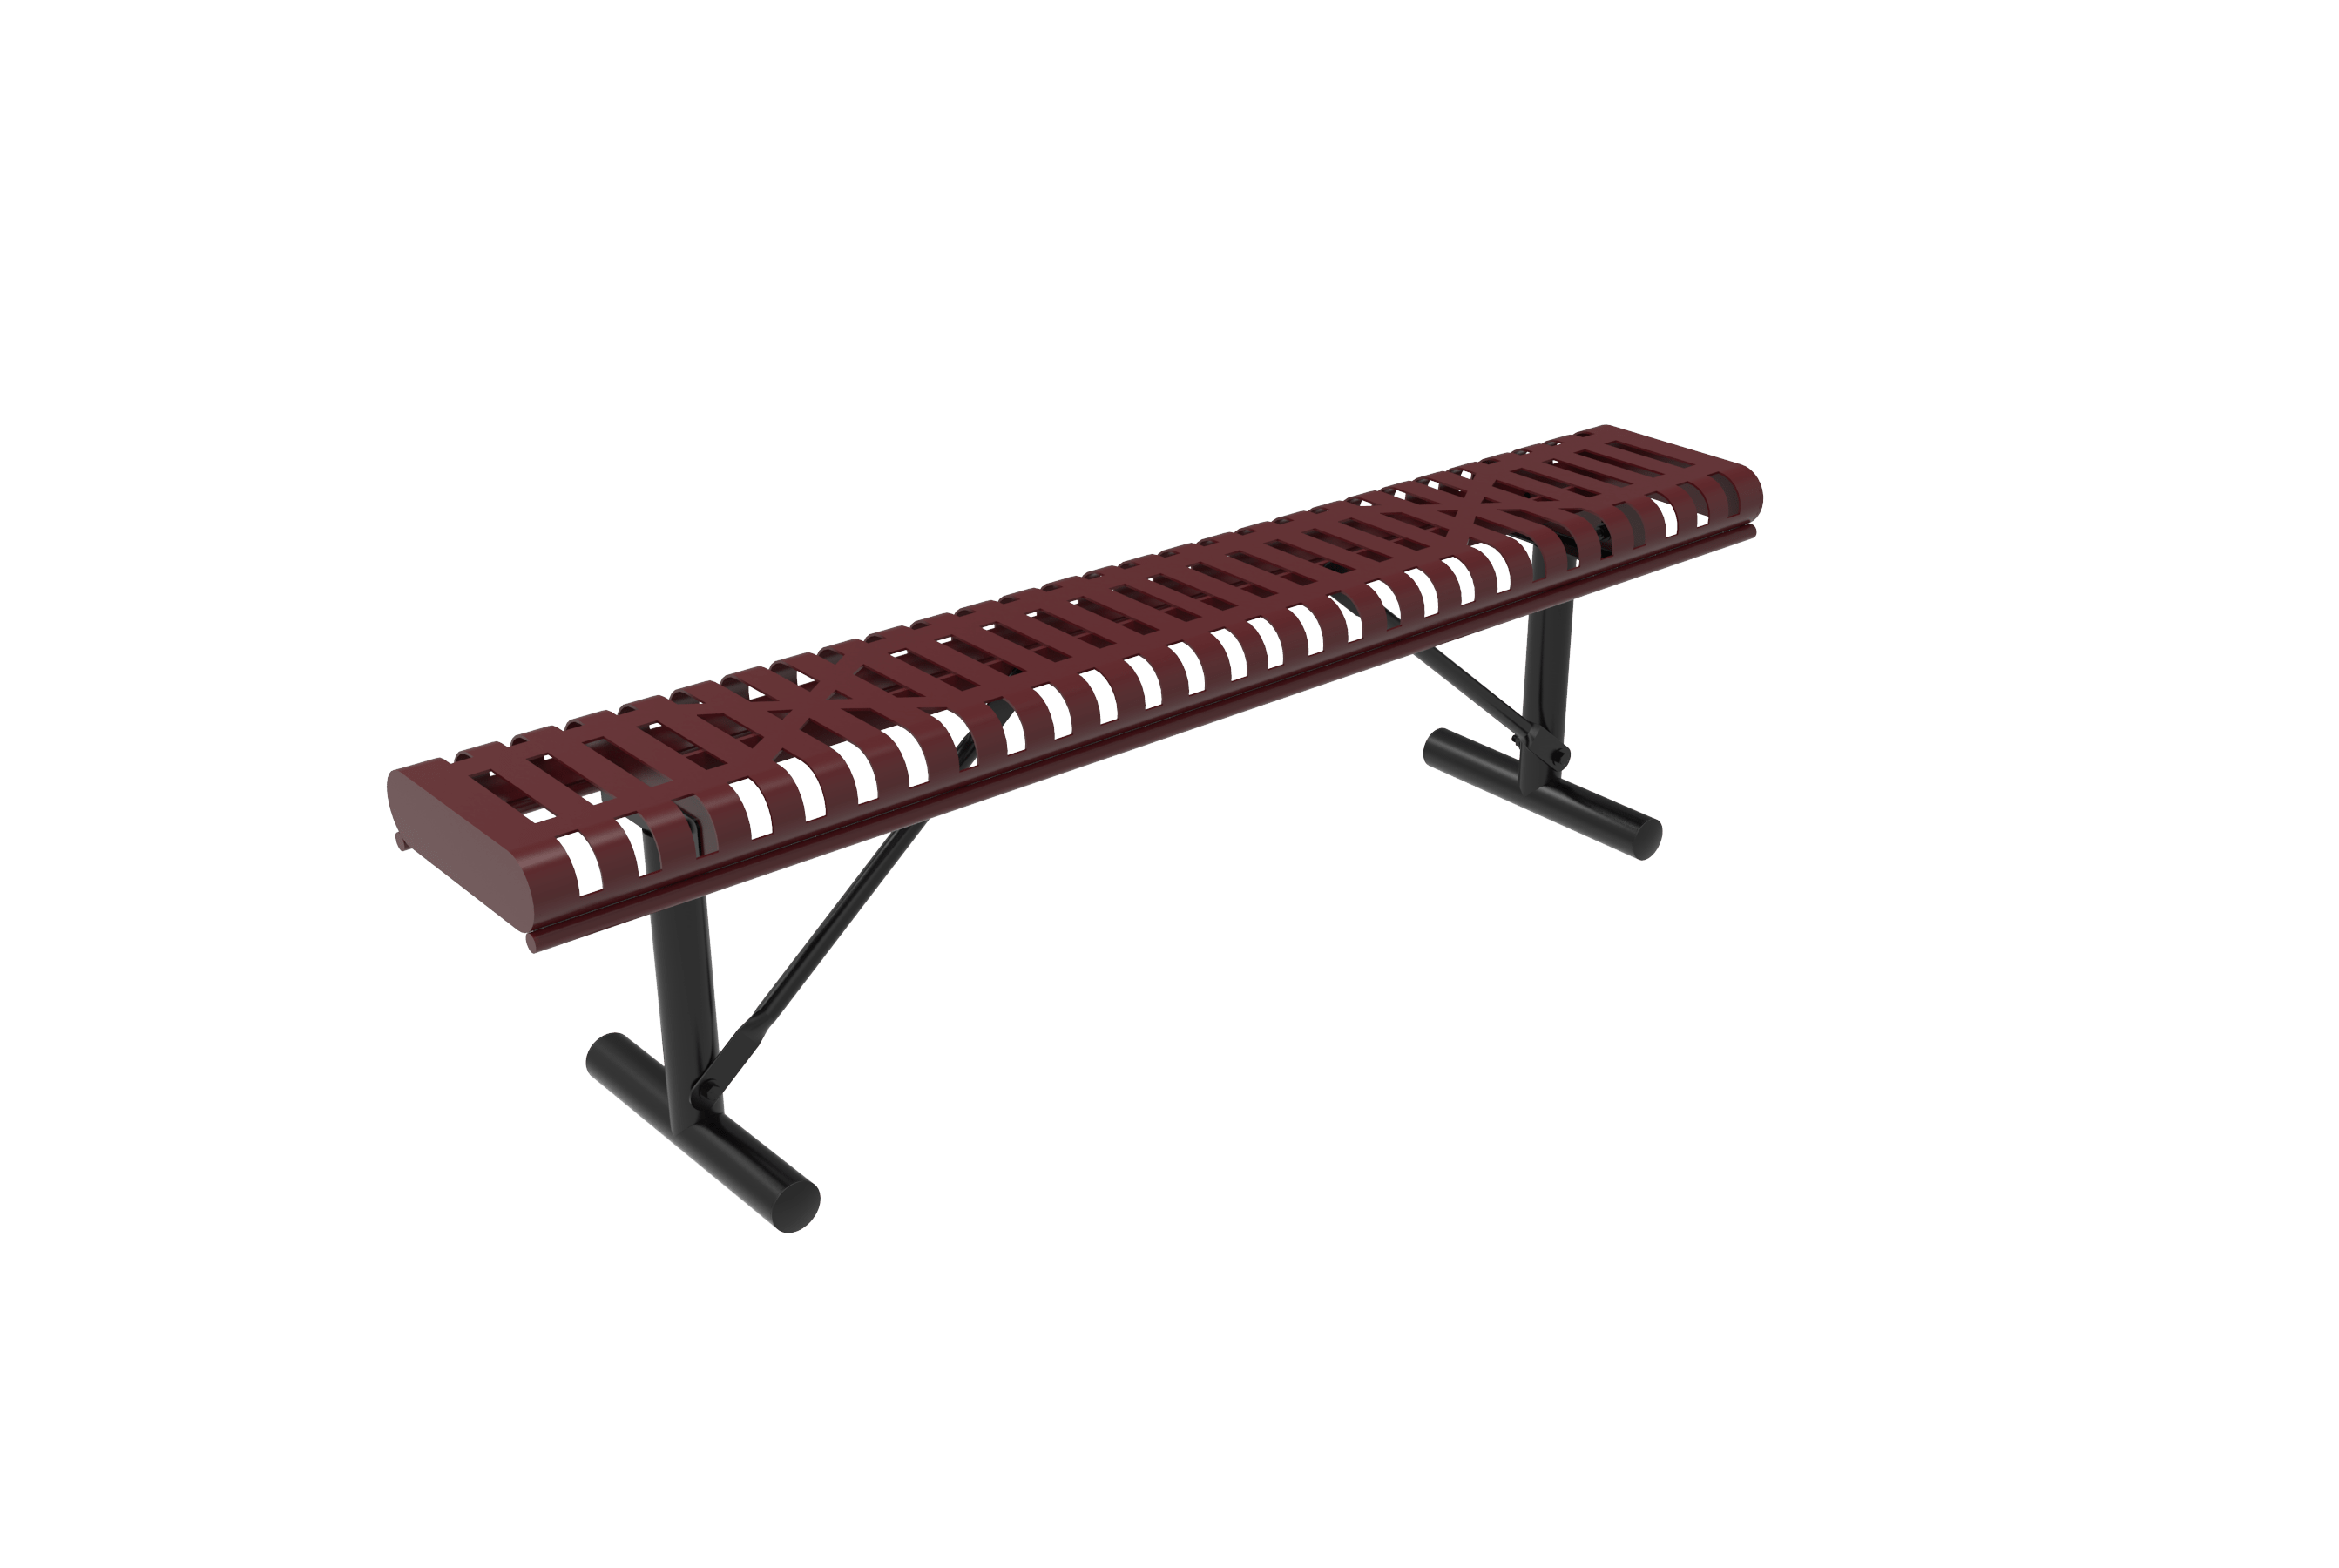 4′ Rolled Bench Without Back-Slat
BRE04-D-21-000
Industry Standard Finish
$419.00
BRE04-B-21-000
Advantage Premium Finish
$519.00
